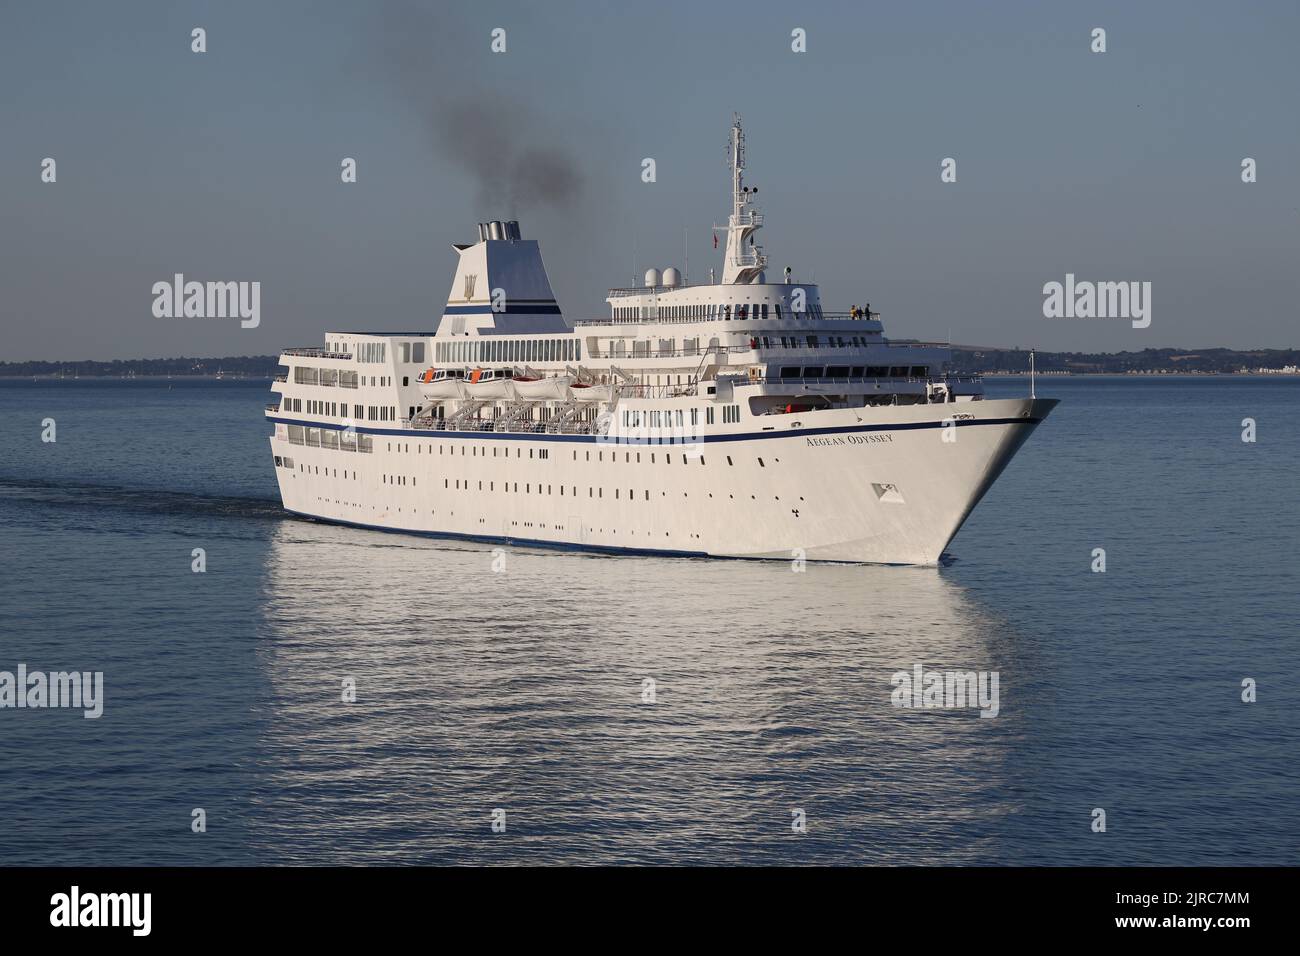 The Voyages to Antiquity cruise ship AEGEAN ODYSSEY arrives at the city in early morning sunshine Stock Photo